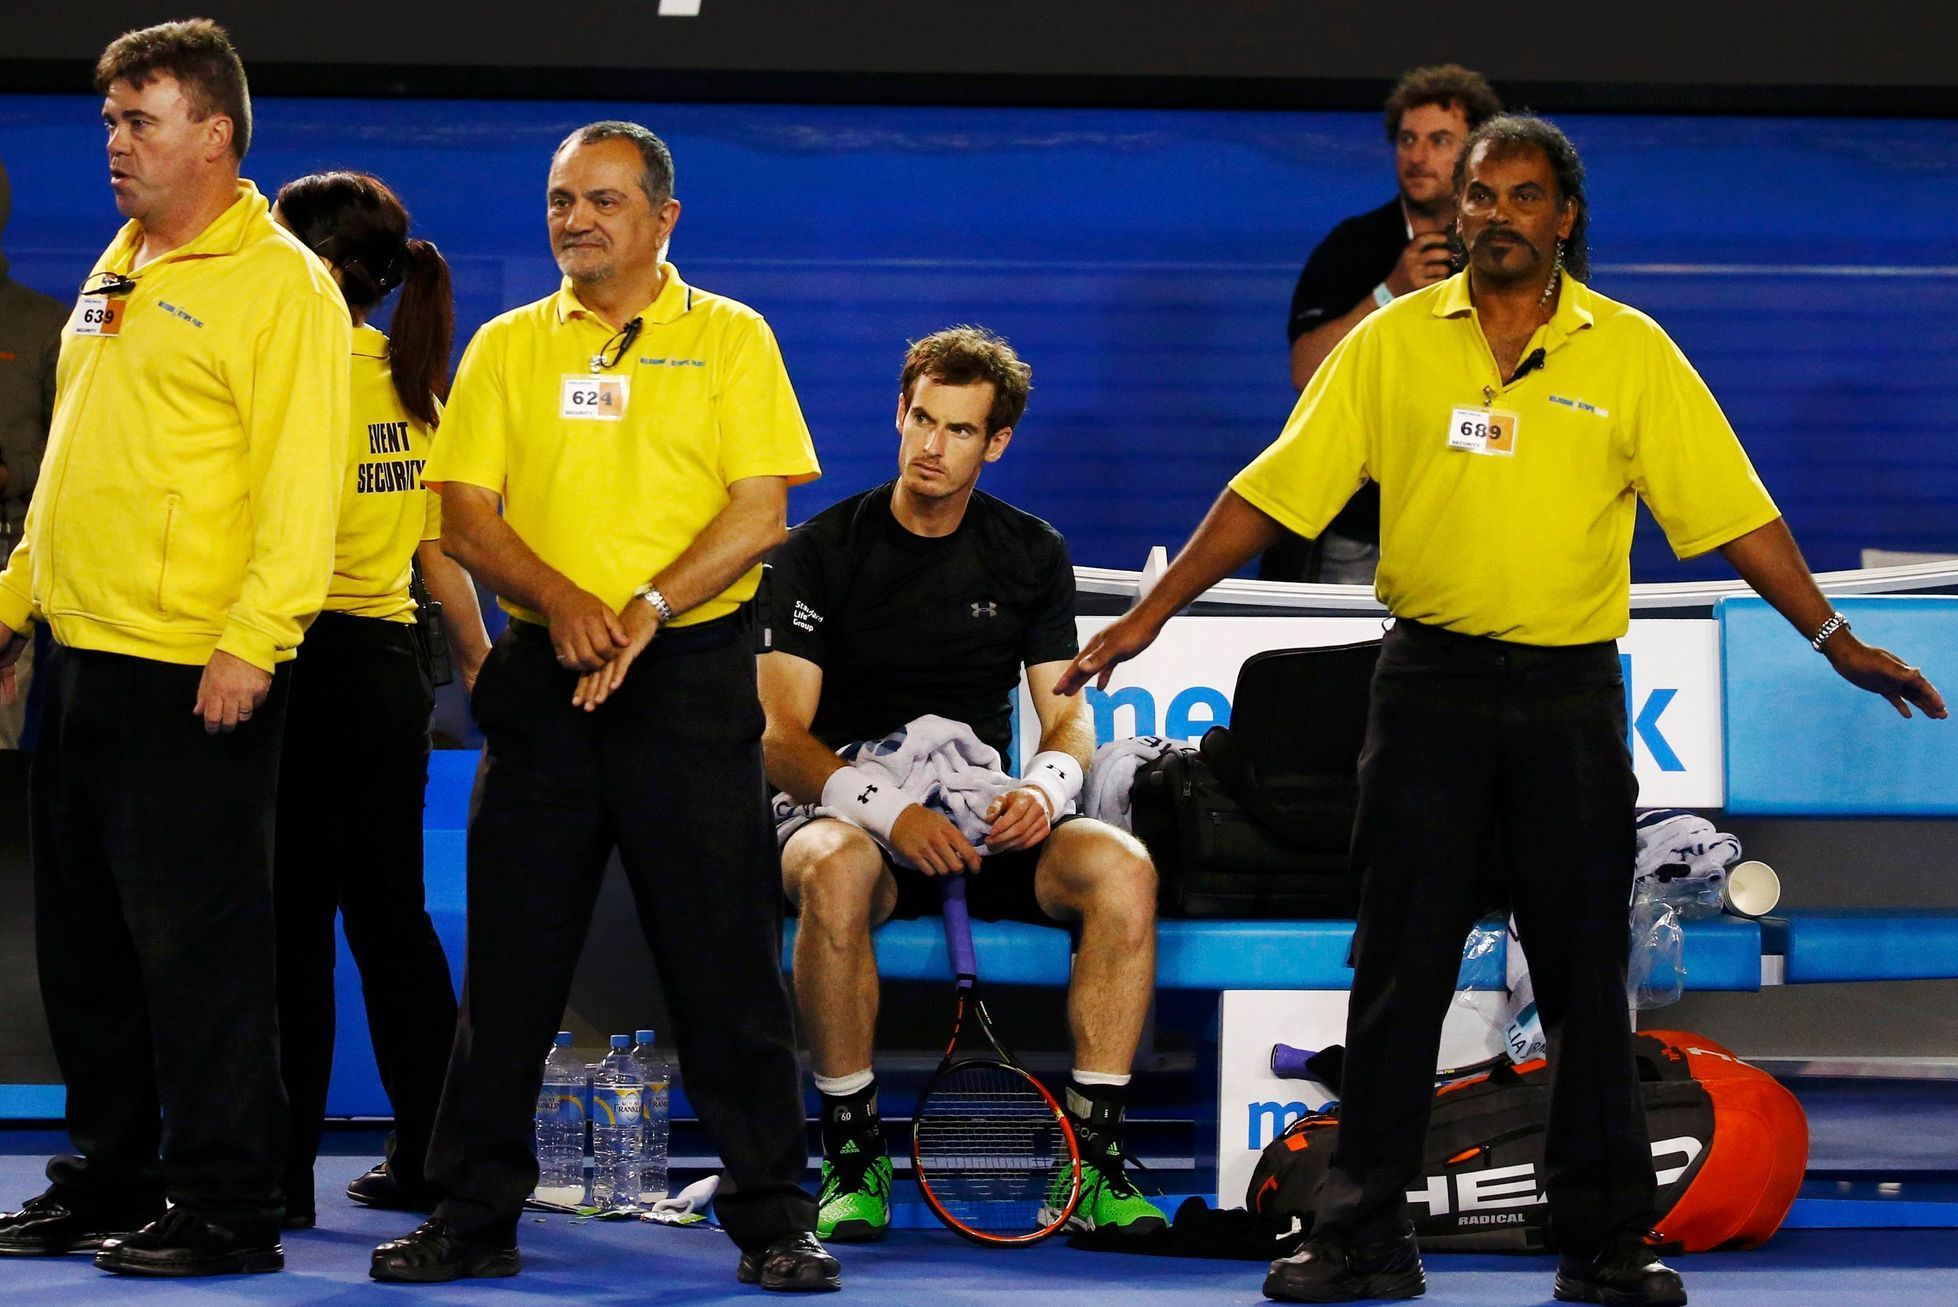 Security staff surround Murray of Britain as protesters are removed during his men's singles final match against Djokovic of Serbia at the Australian Open 2015 tennis tournament in Melbourne